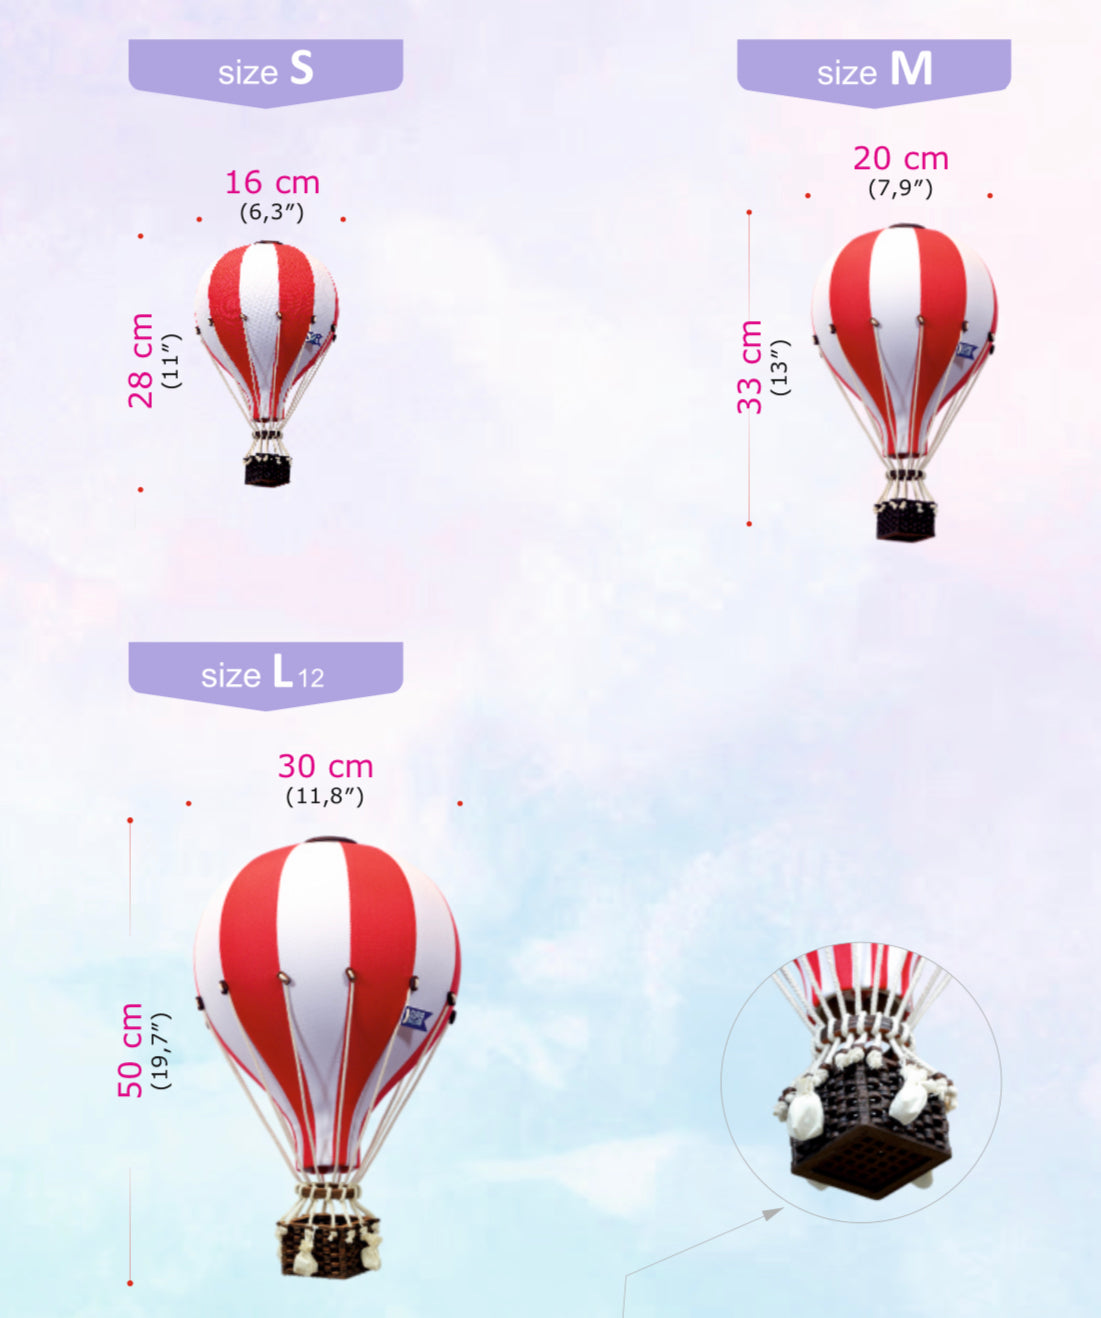 Pink and White Decorative Hot Air Balloon